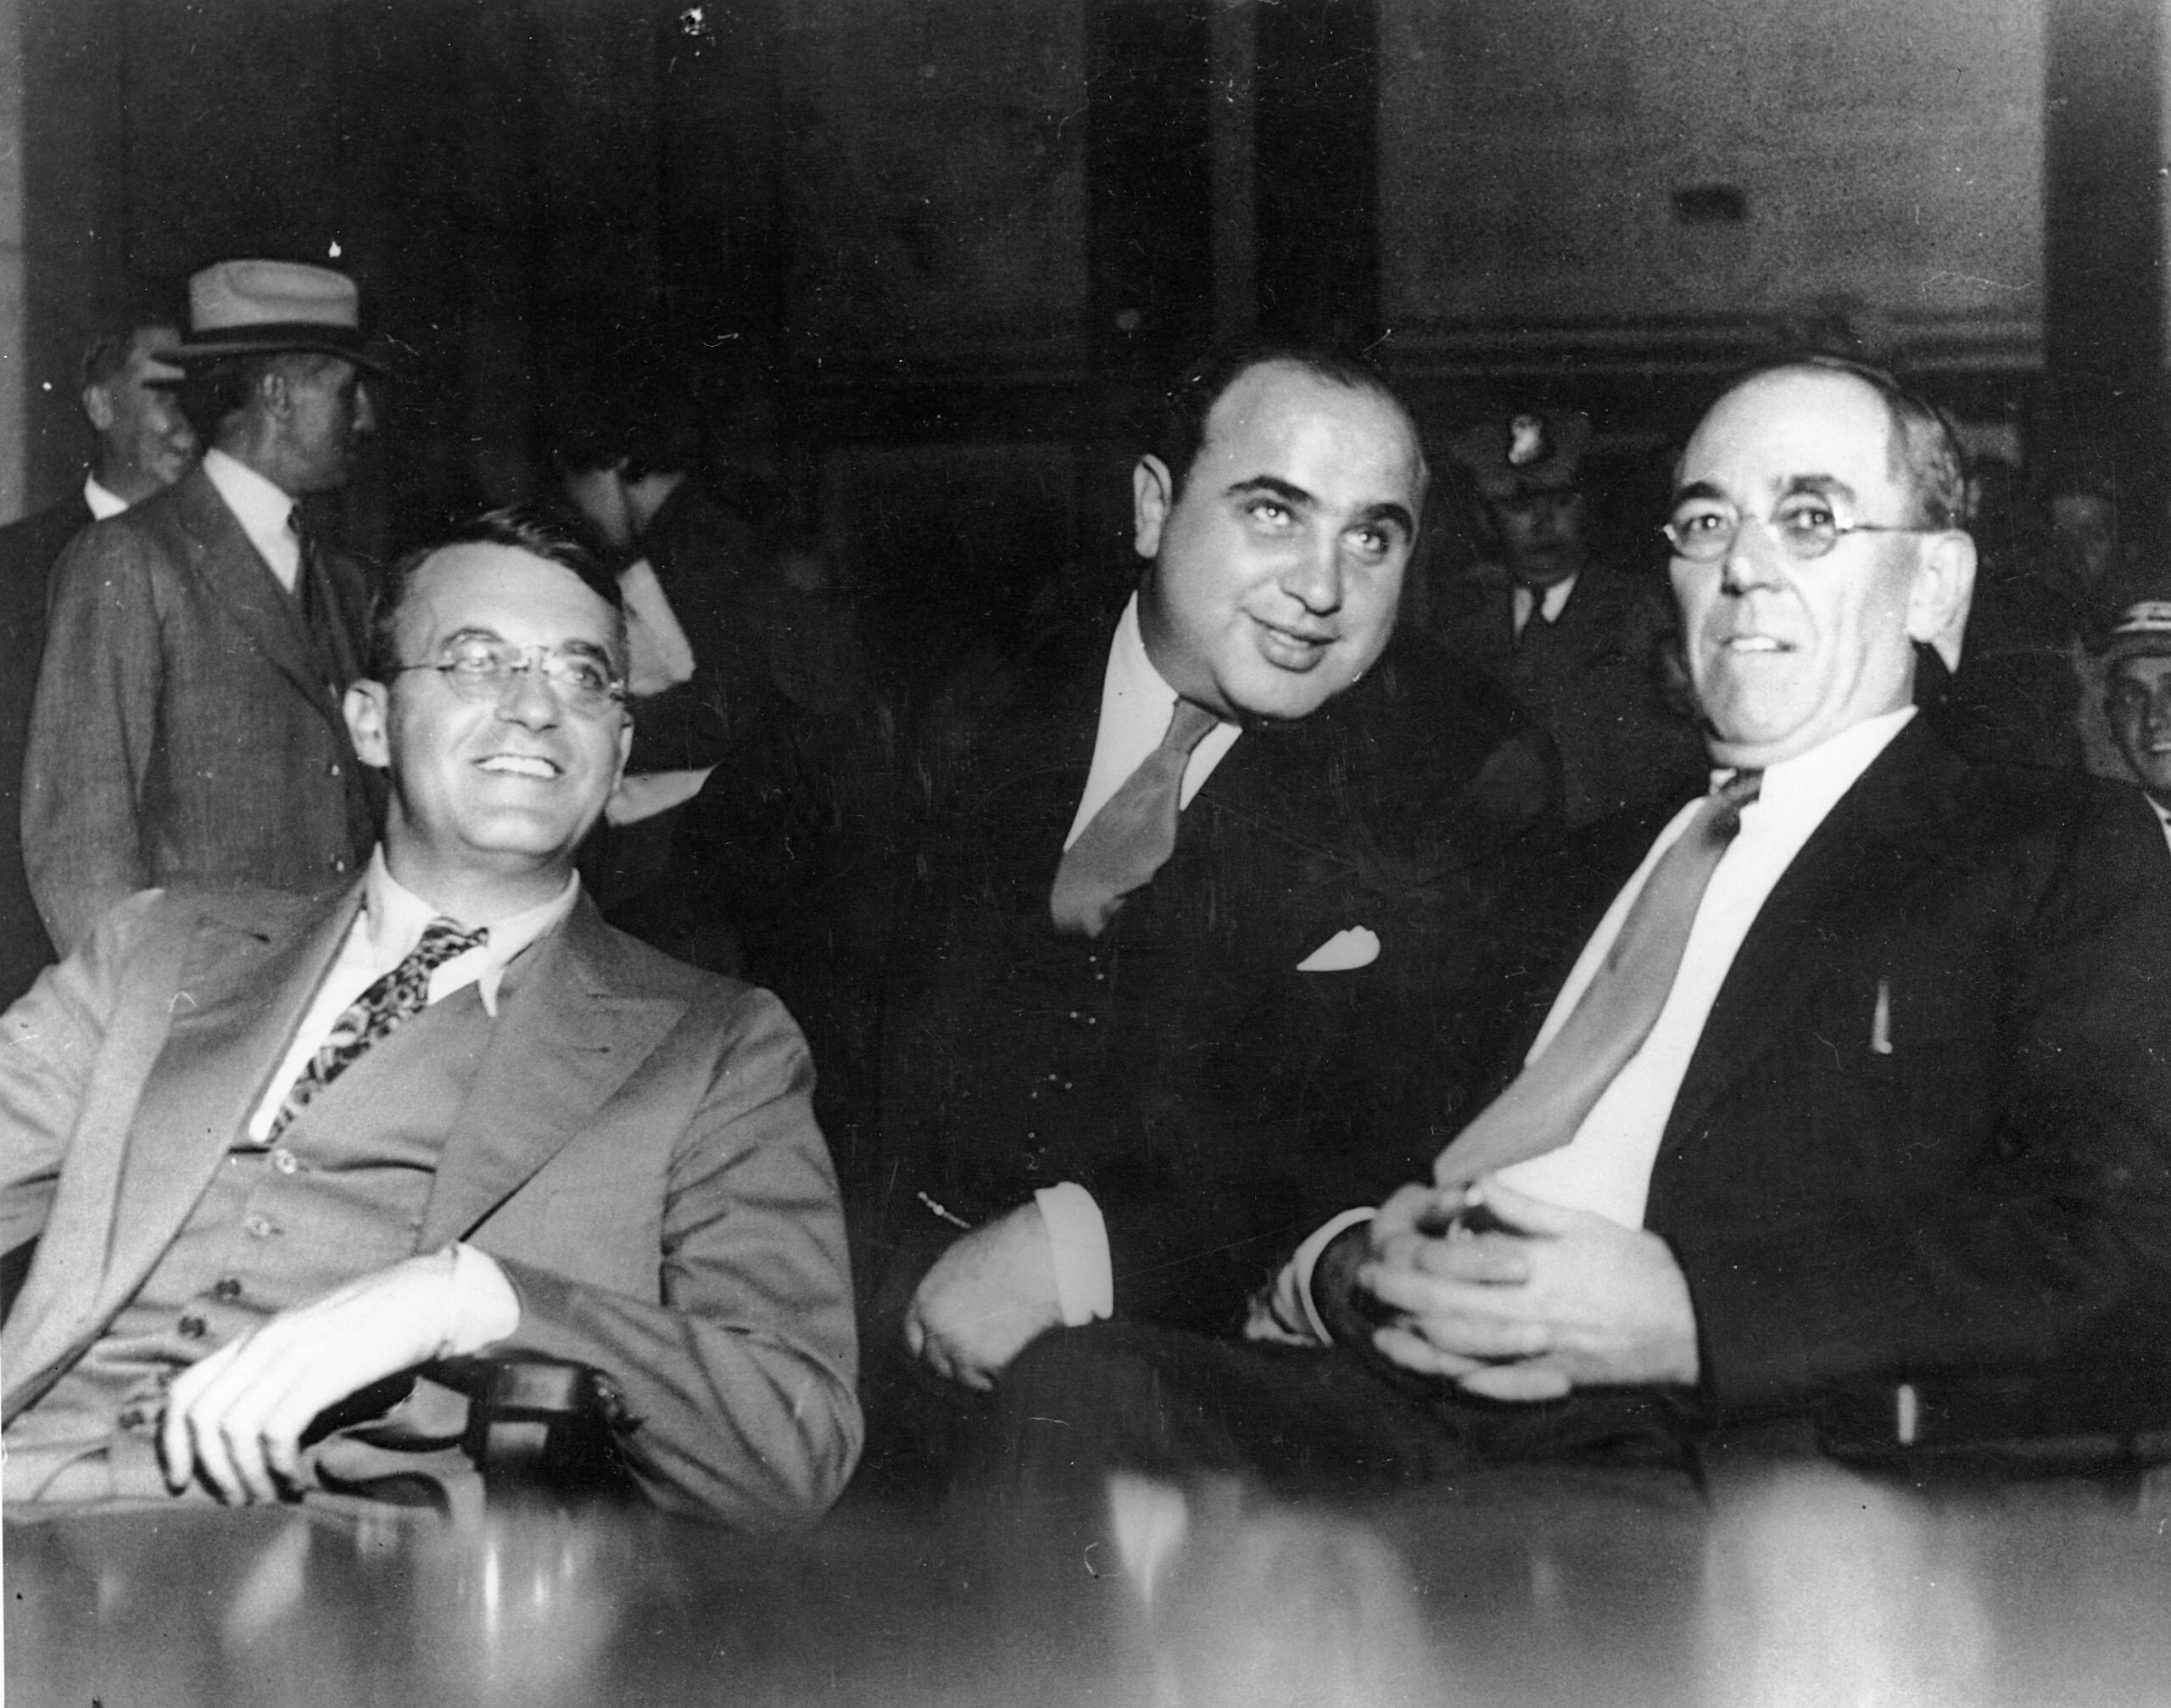 Al Capone seen in federal court in Chicago